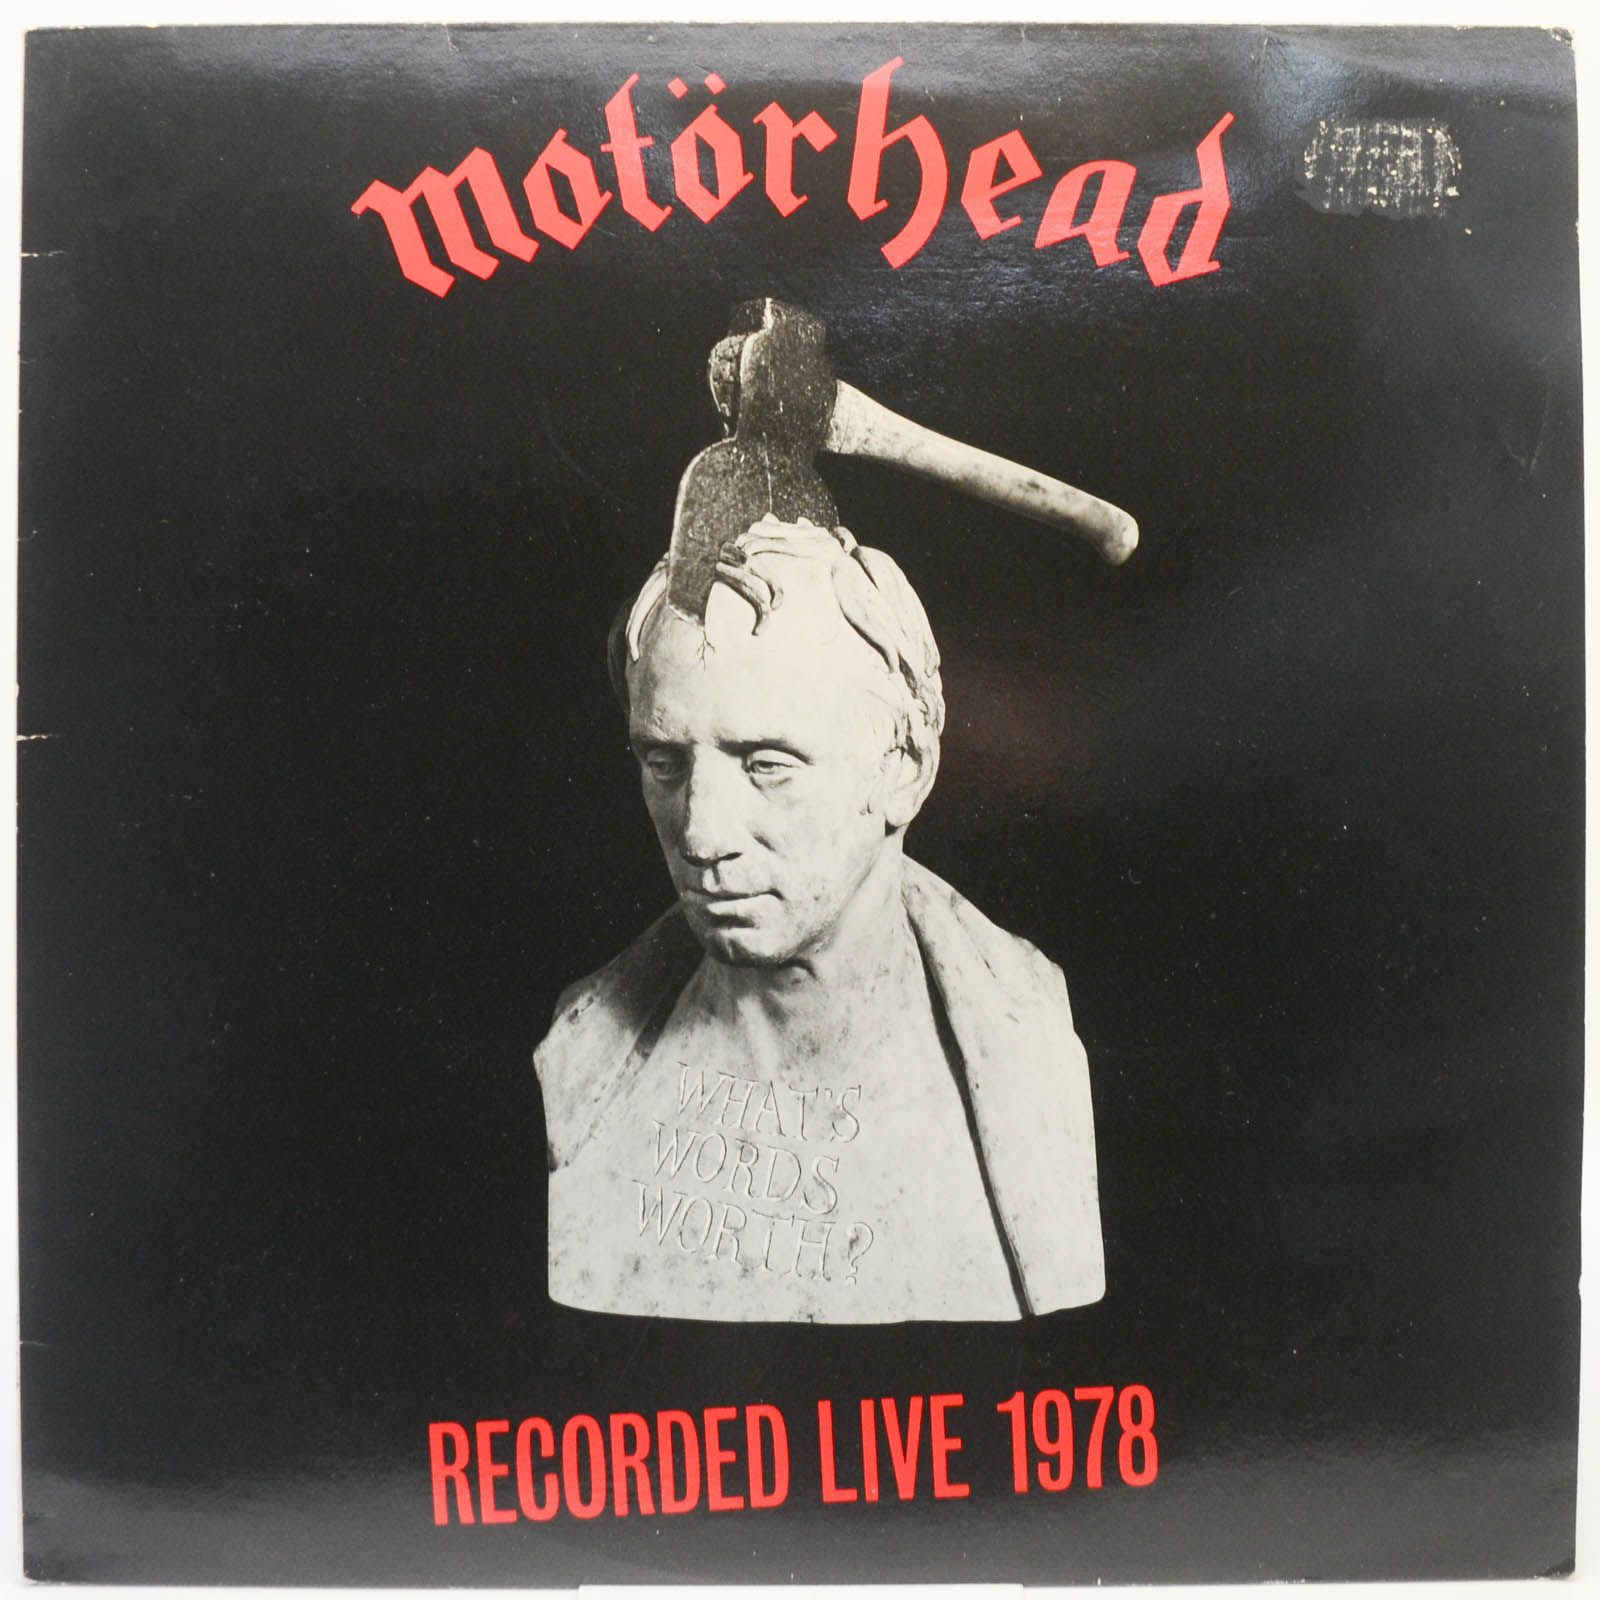 Motörhead — What's Words Worth? (Recorded Live 1978) (UK), 1983